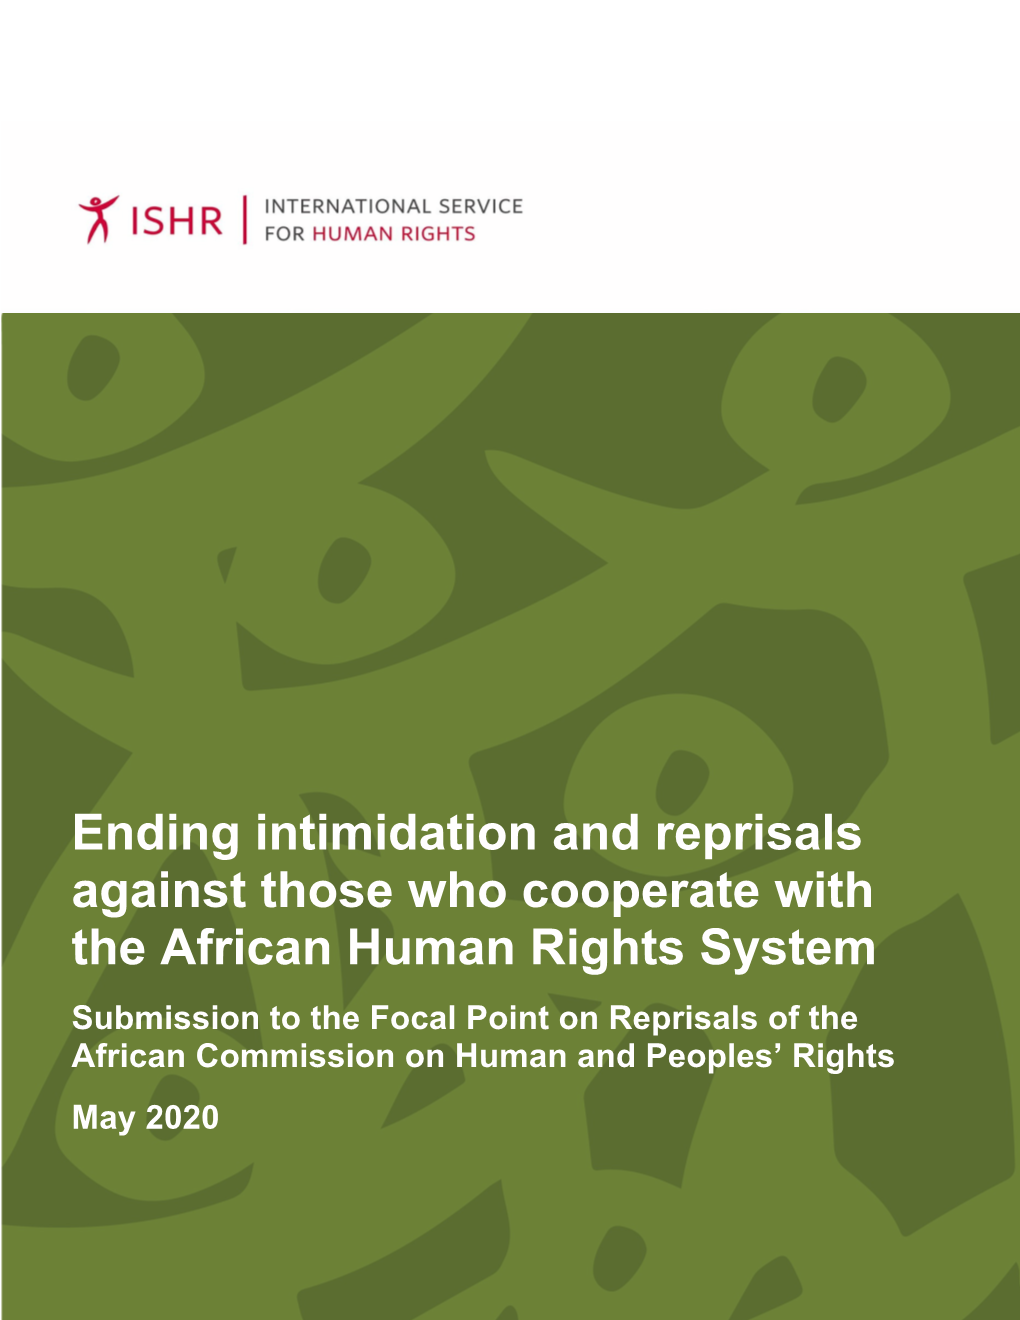 Ending Intimidation and Reprisals Against Those Who Cooperate with the African Human Rights System